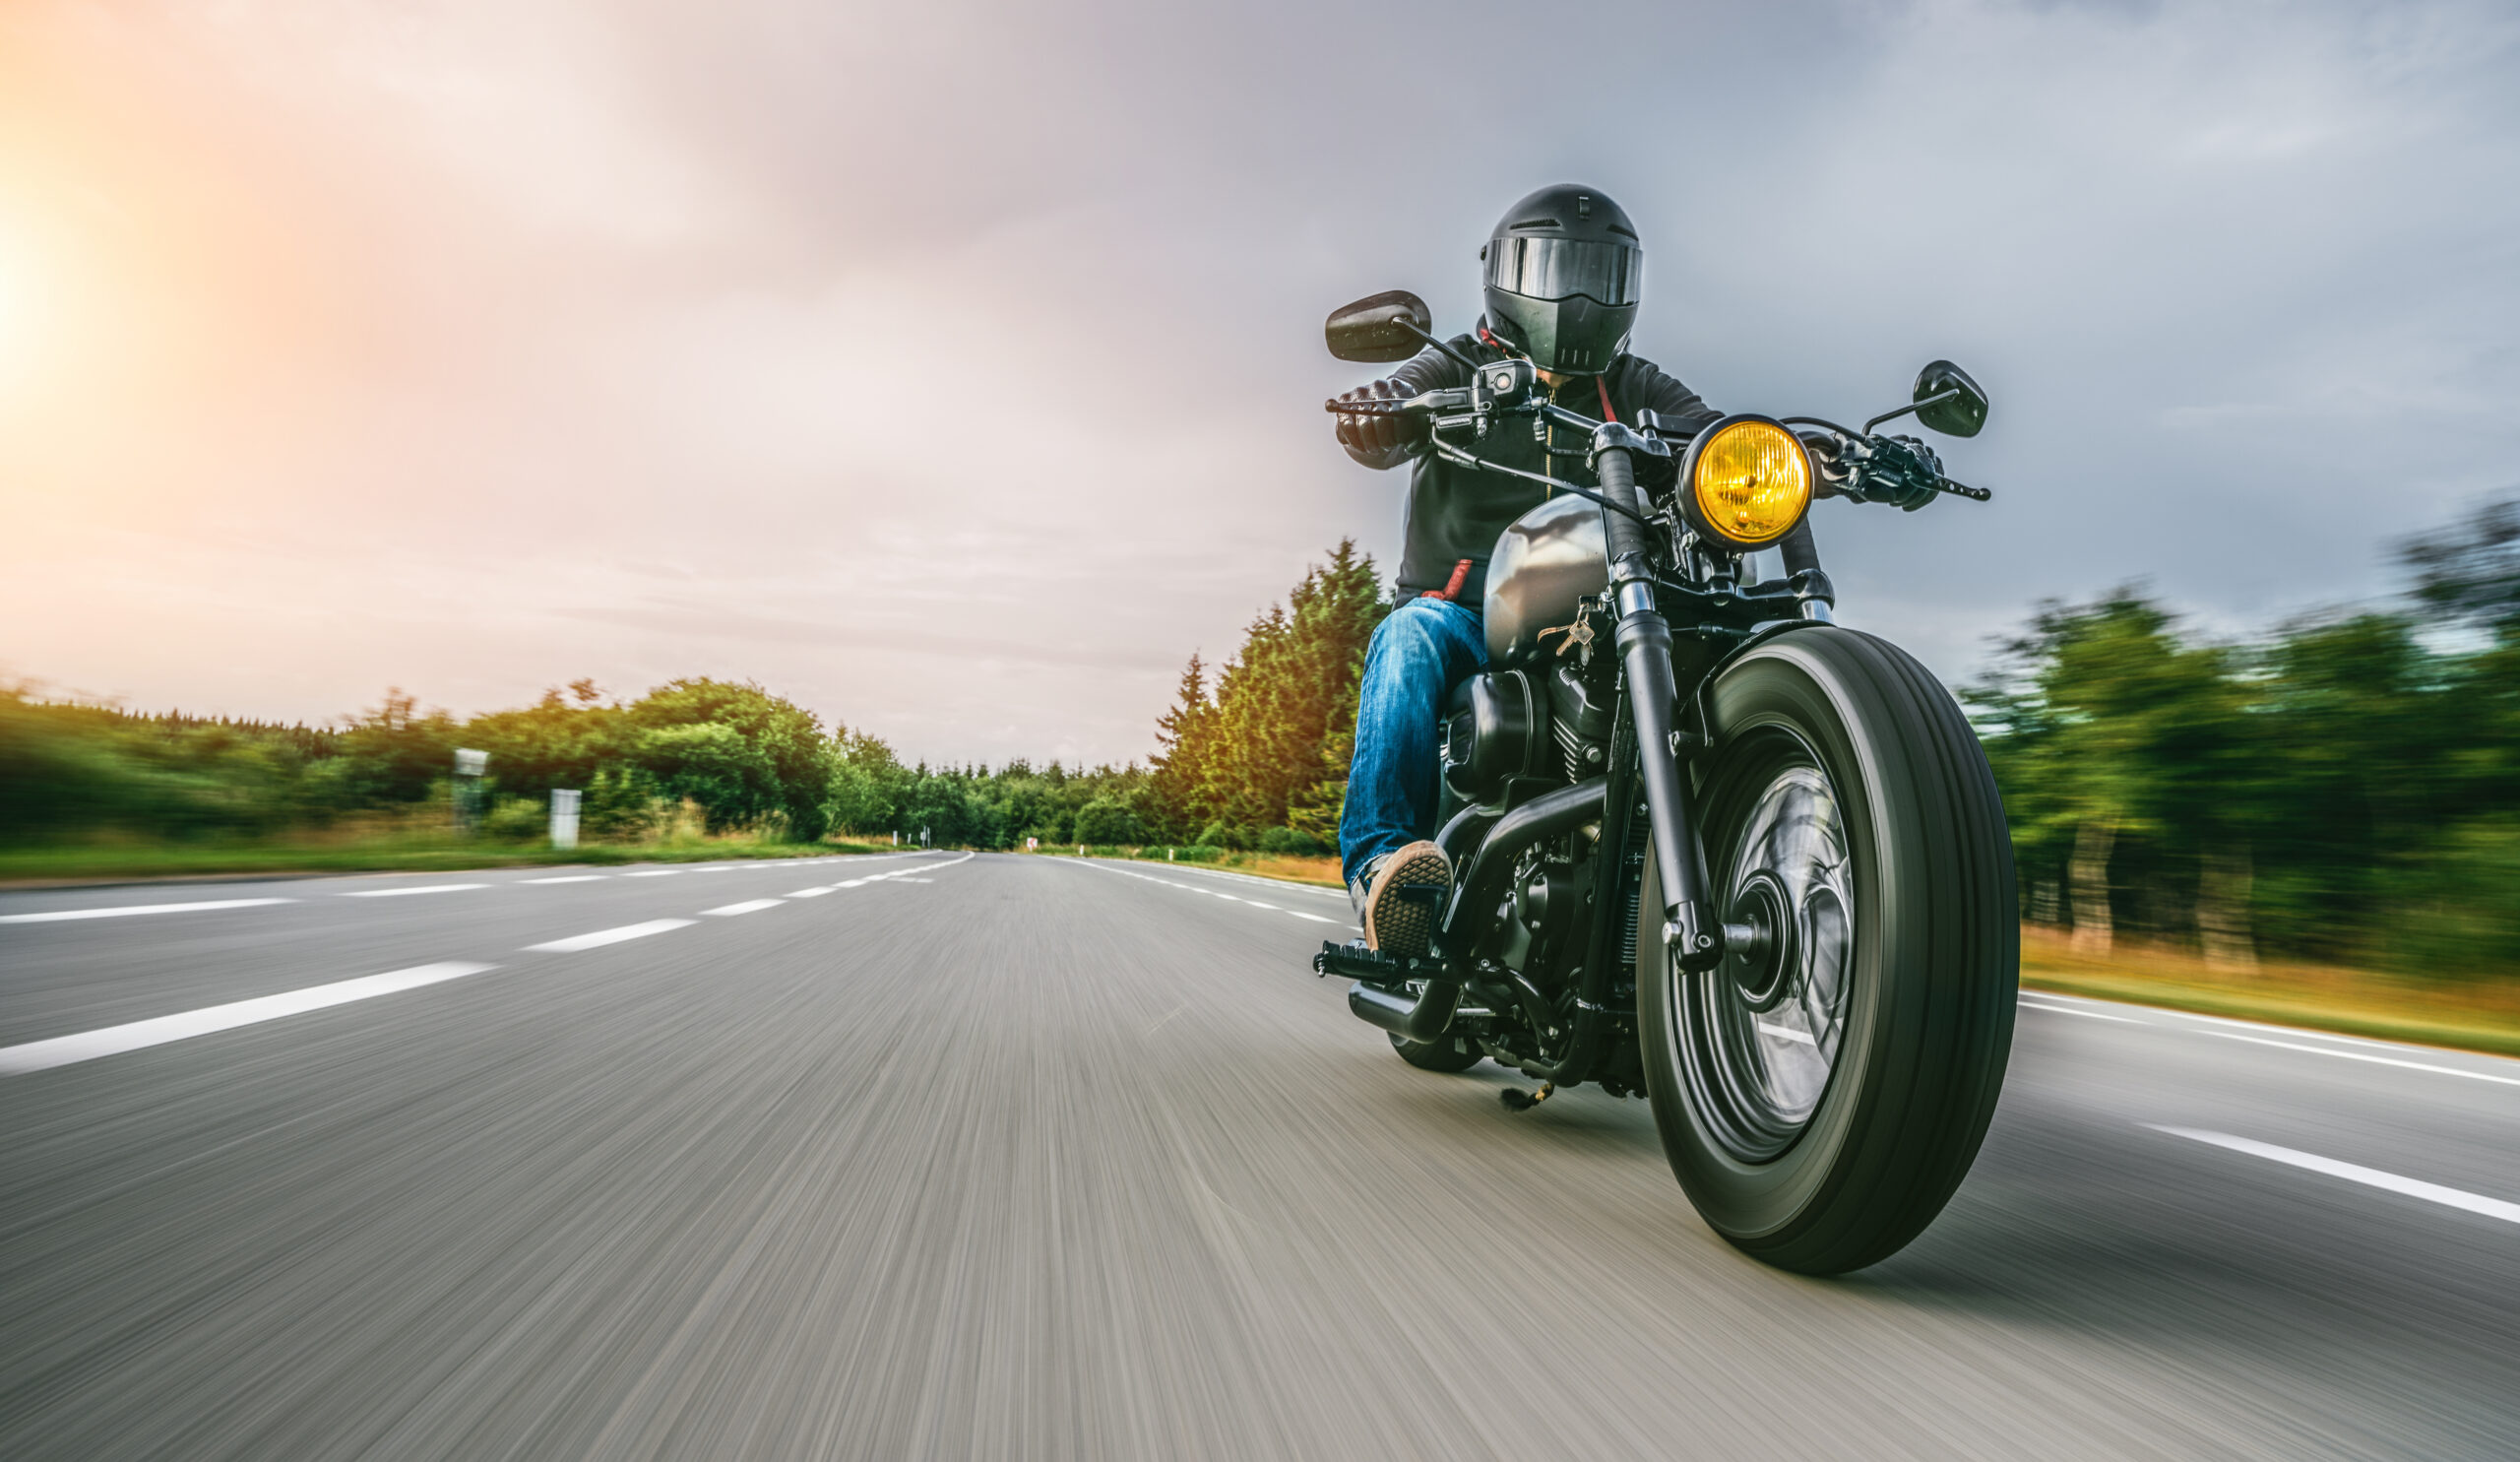 With a motorcycle loan, this rider's dream of cruising the Tennessee highways became a reality.